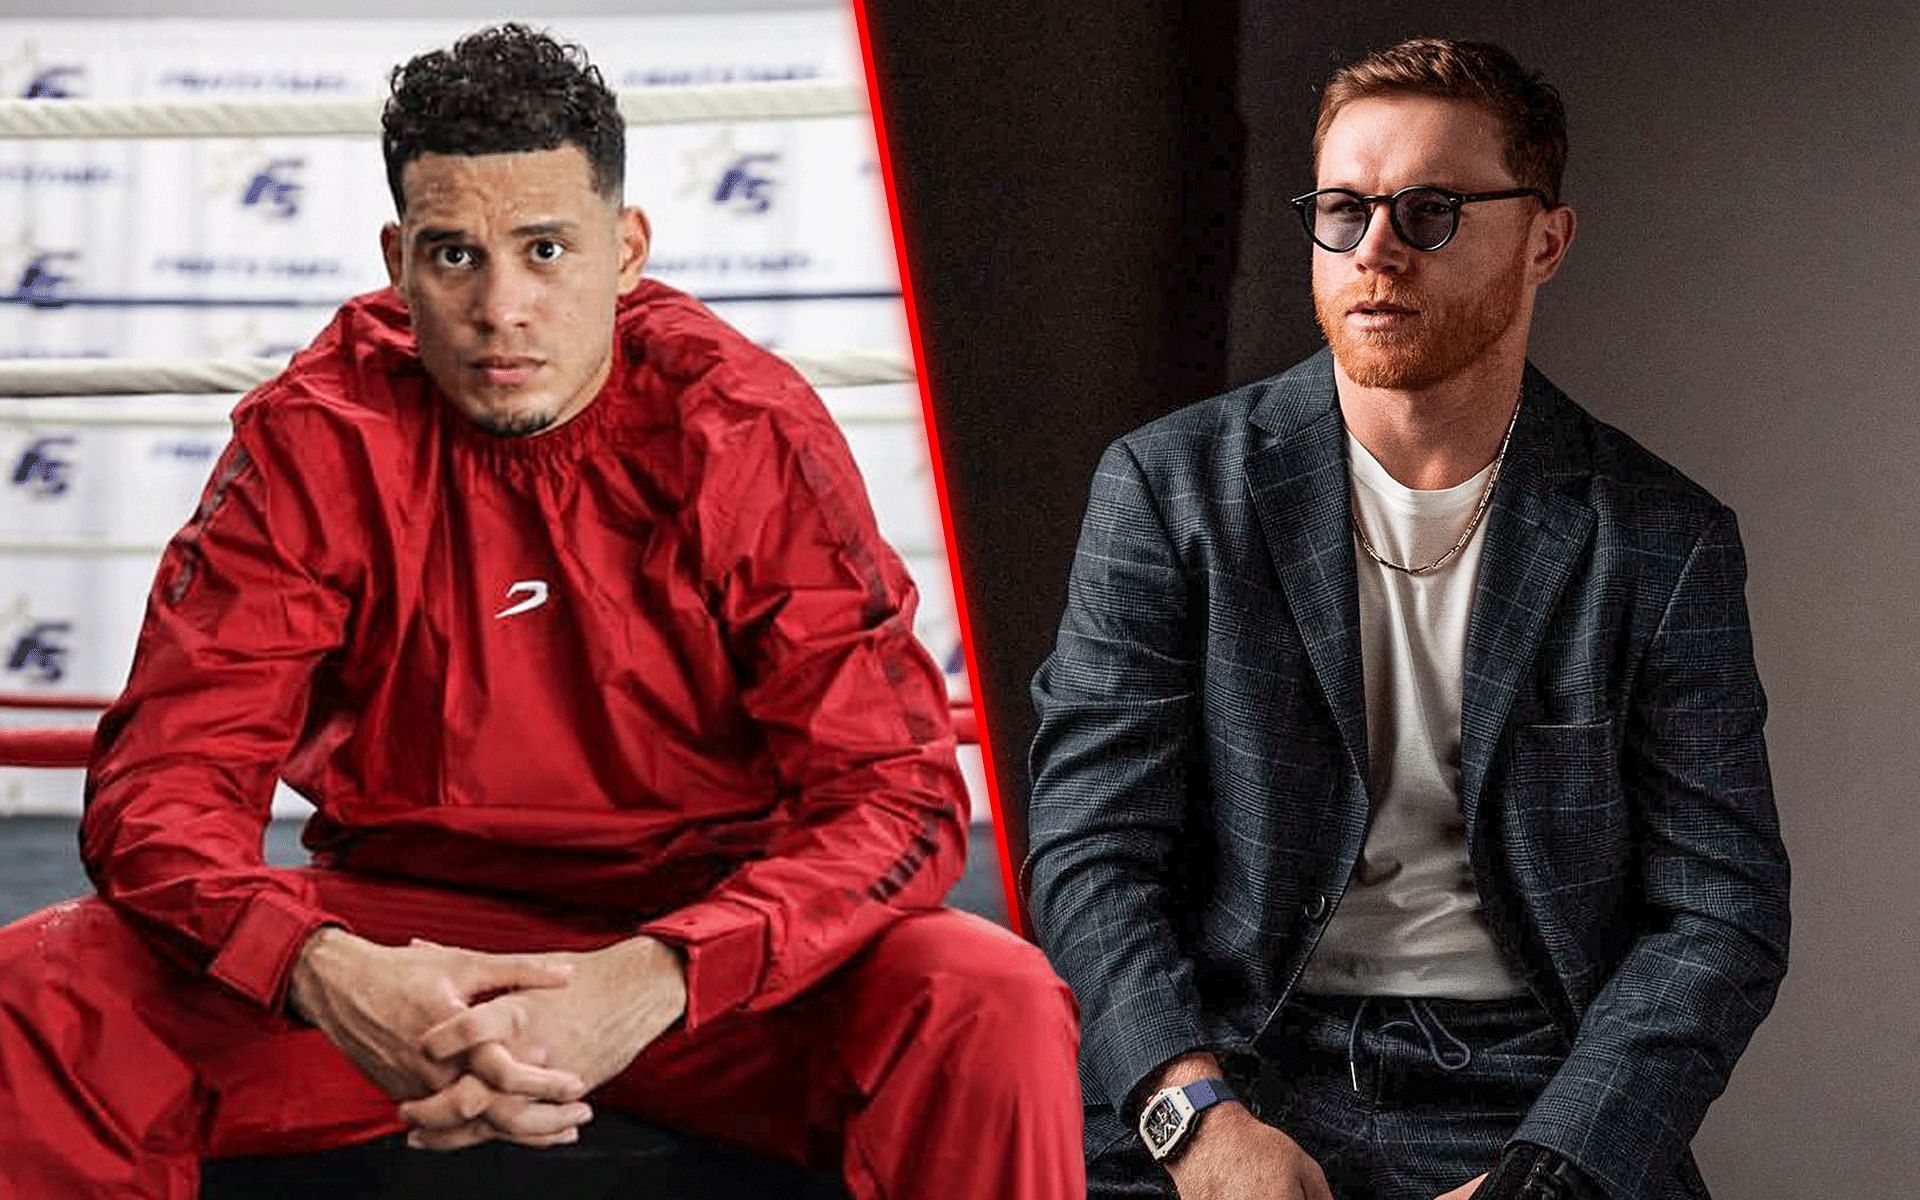 David Benavidez (left) has his sights set on dethroning Saul Canelo Alvarez (right) to become the undisputed super middleweight champion [Images courtesy: @benavidez300 and @canelo on Instagram]